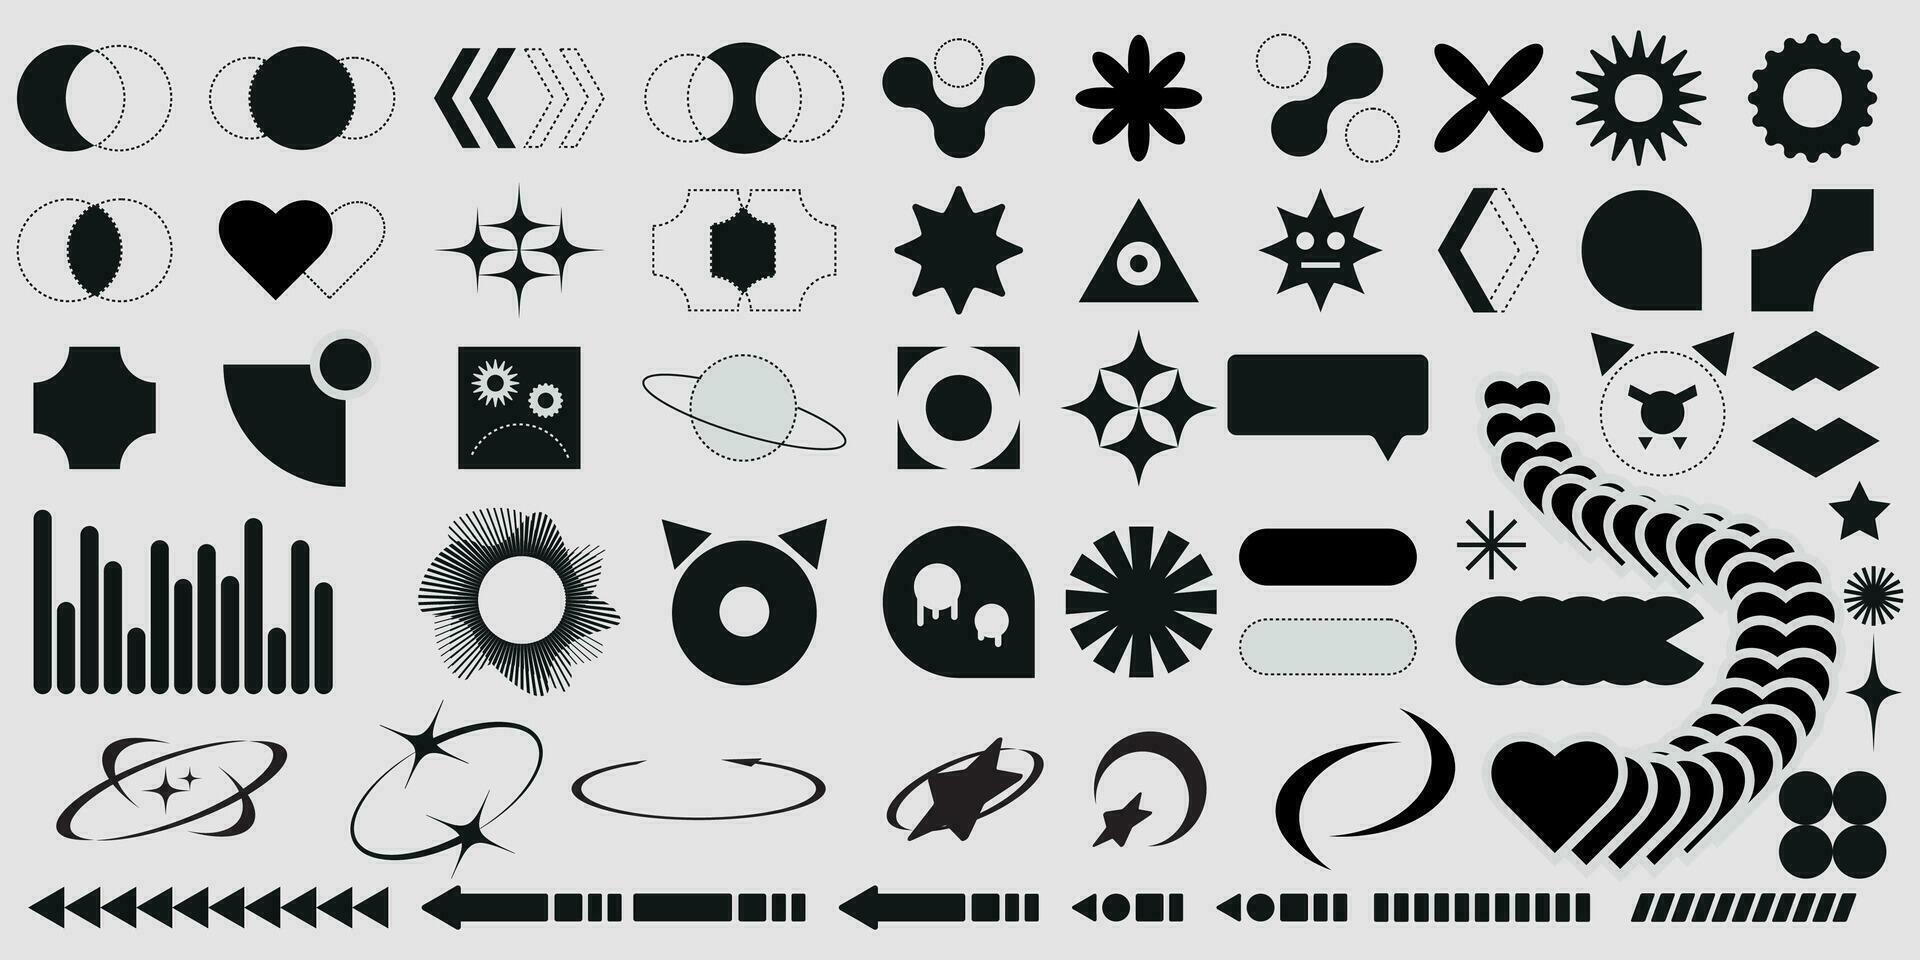 Set of Y2K retro elements and cyberpunk abstract geometric shapes. Hipster graphic objects for logo, icon, web design. Vector illustration.